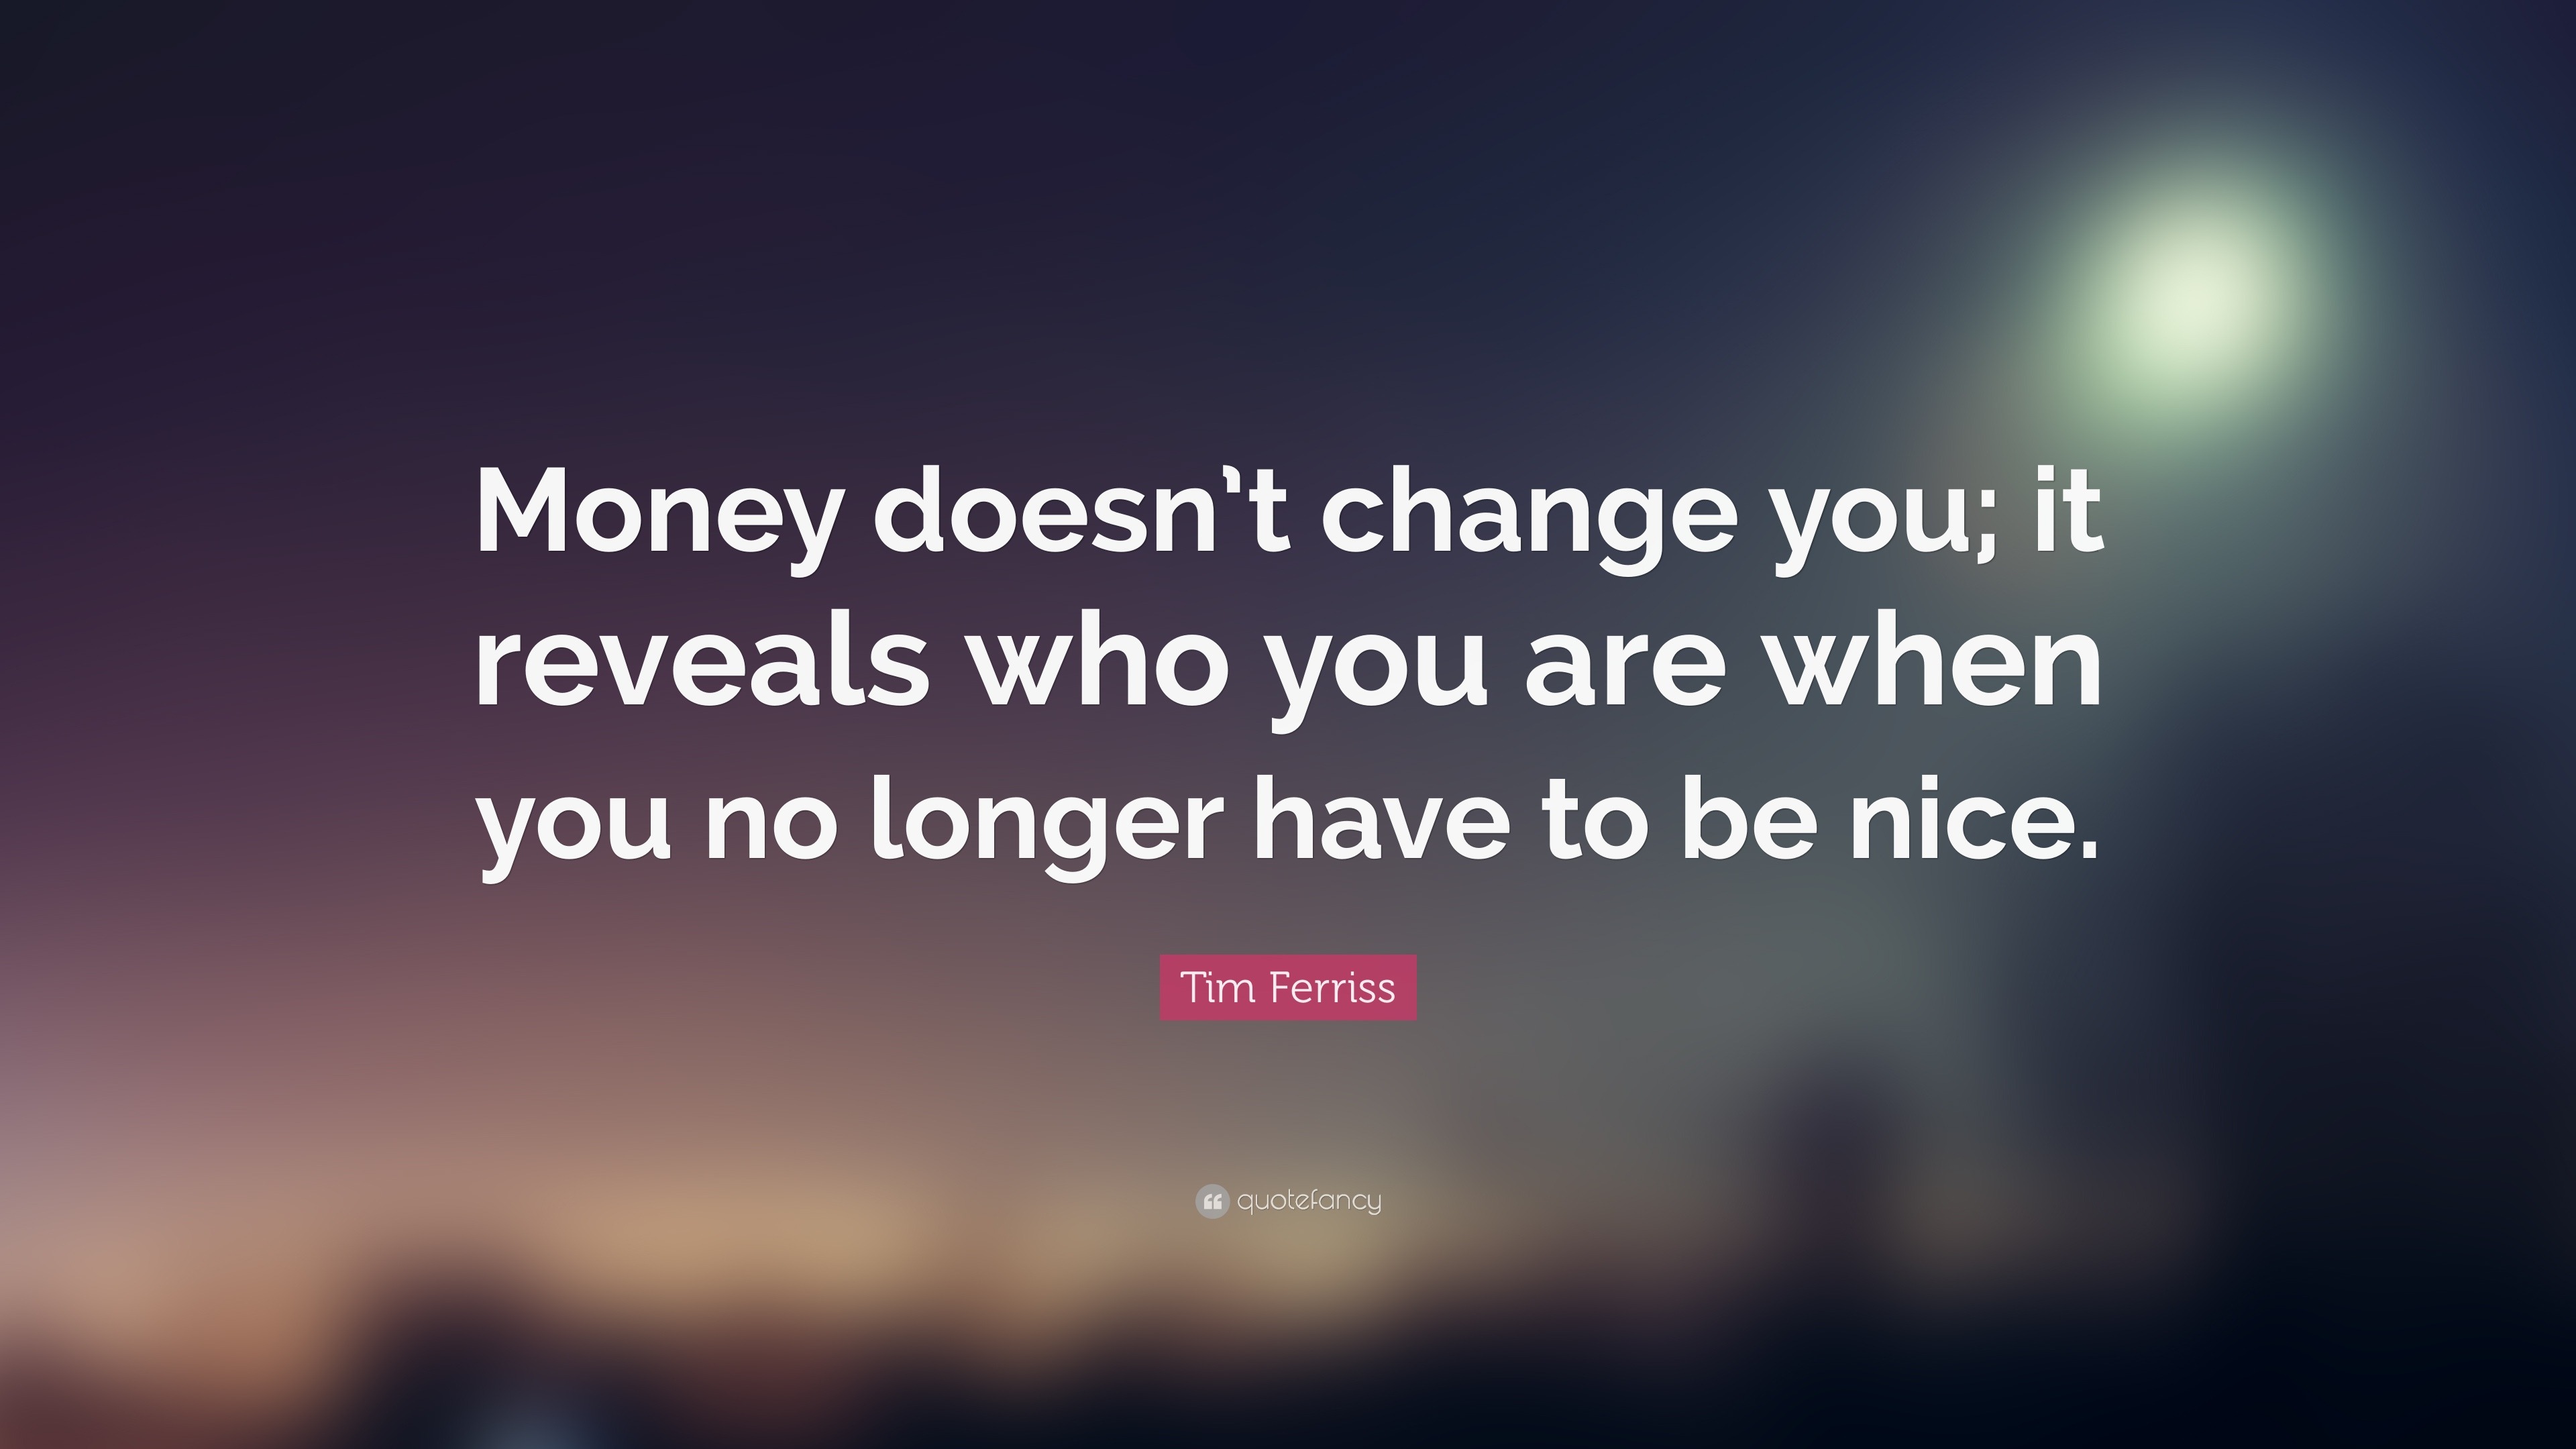 56277 Tim Ferriss Quote Money doesn t change you it reveals who you are